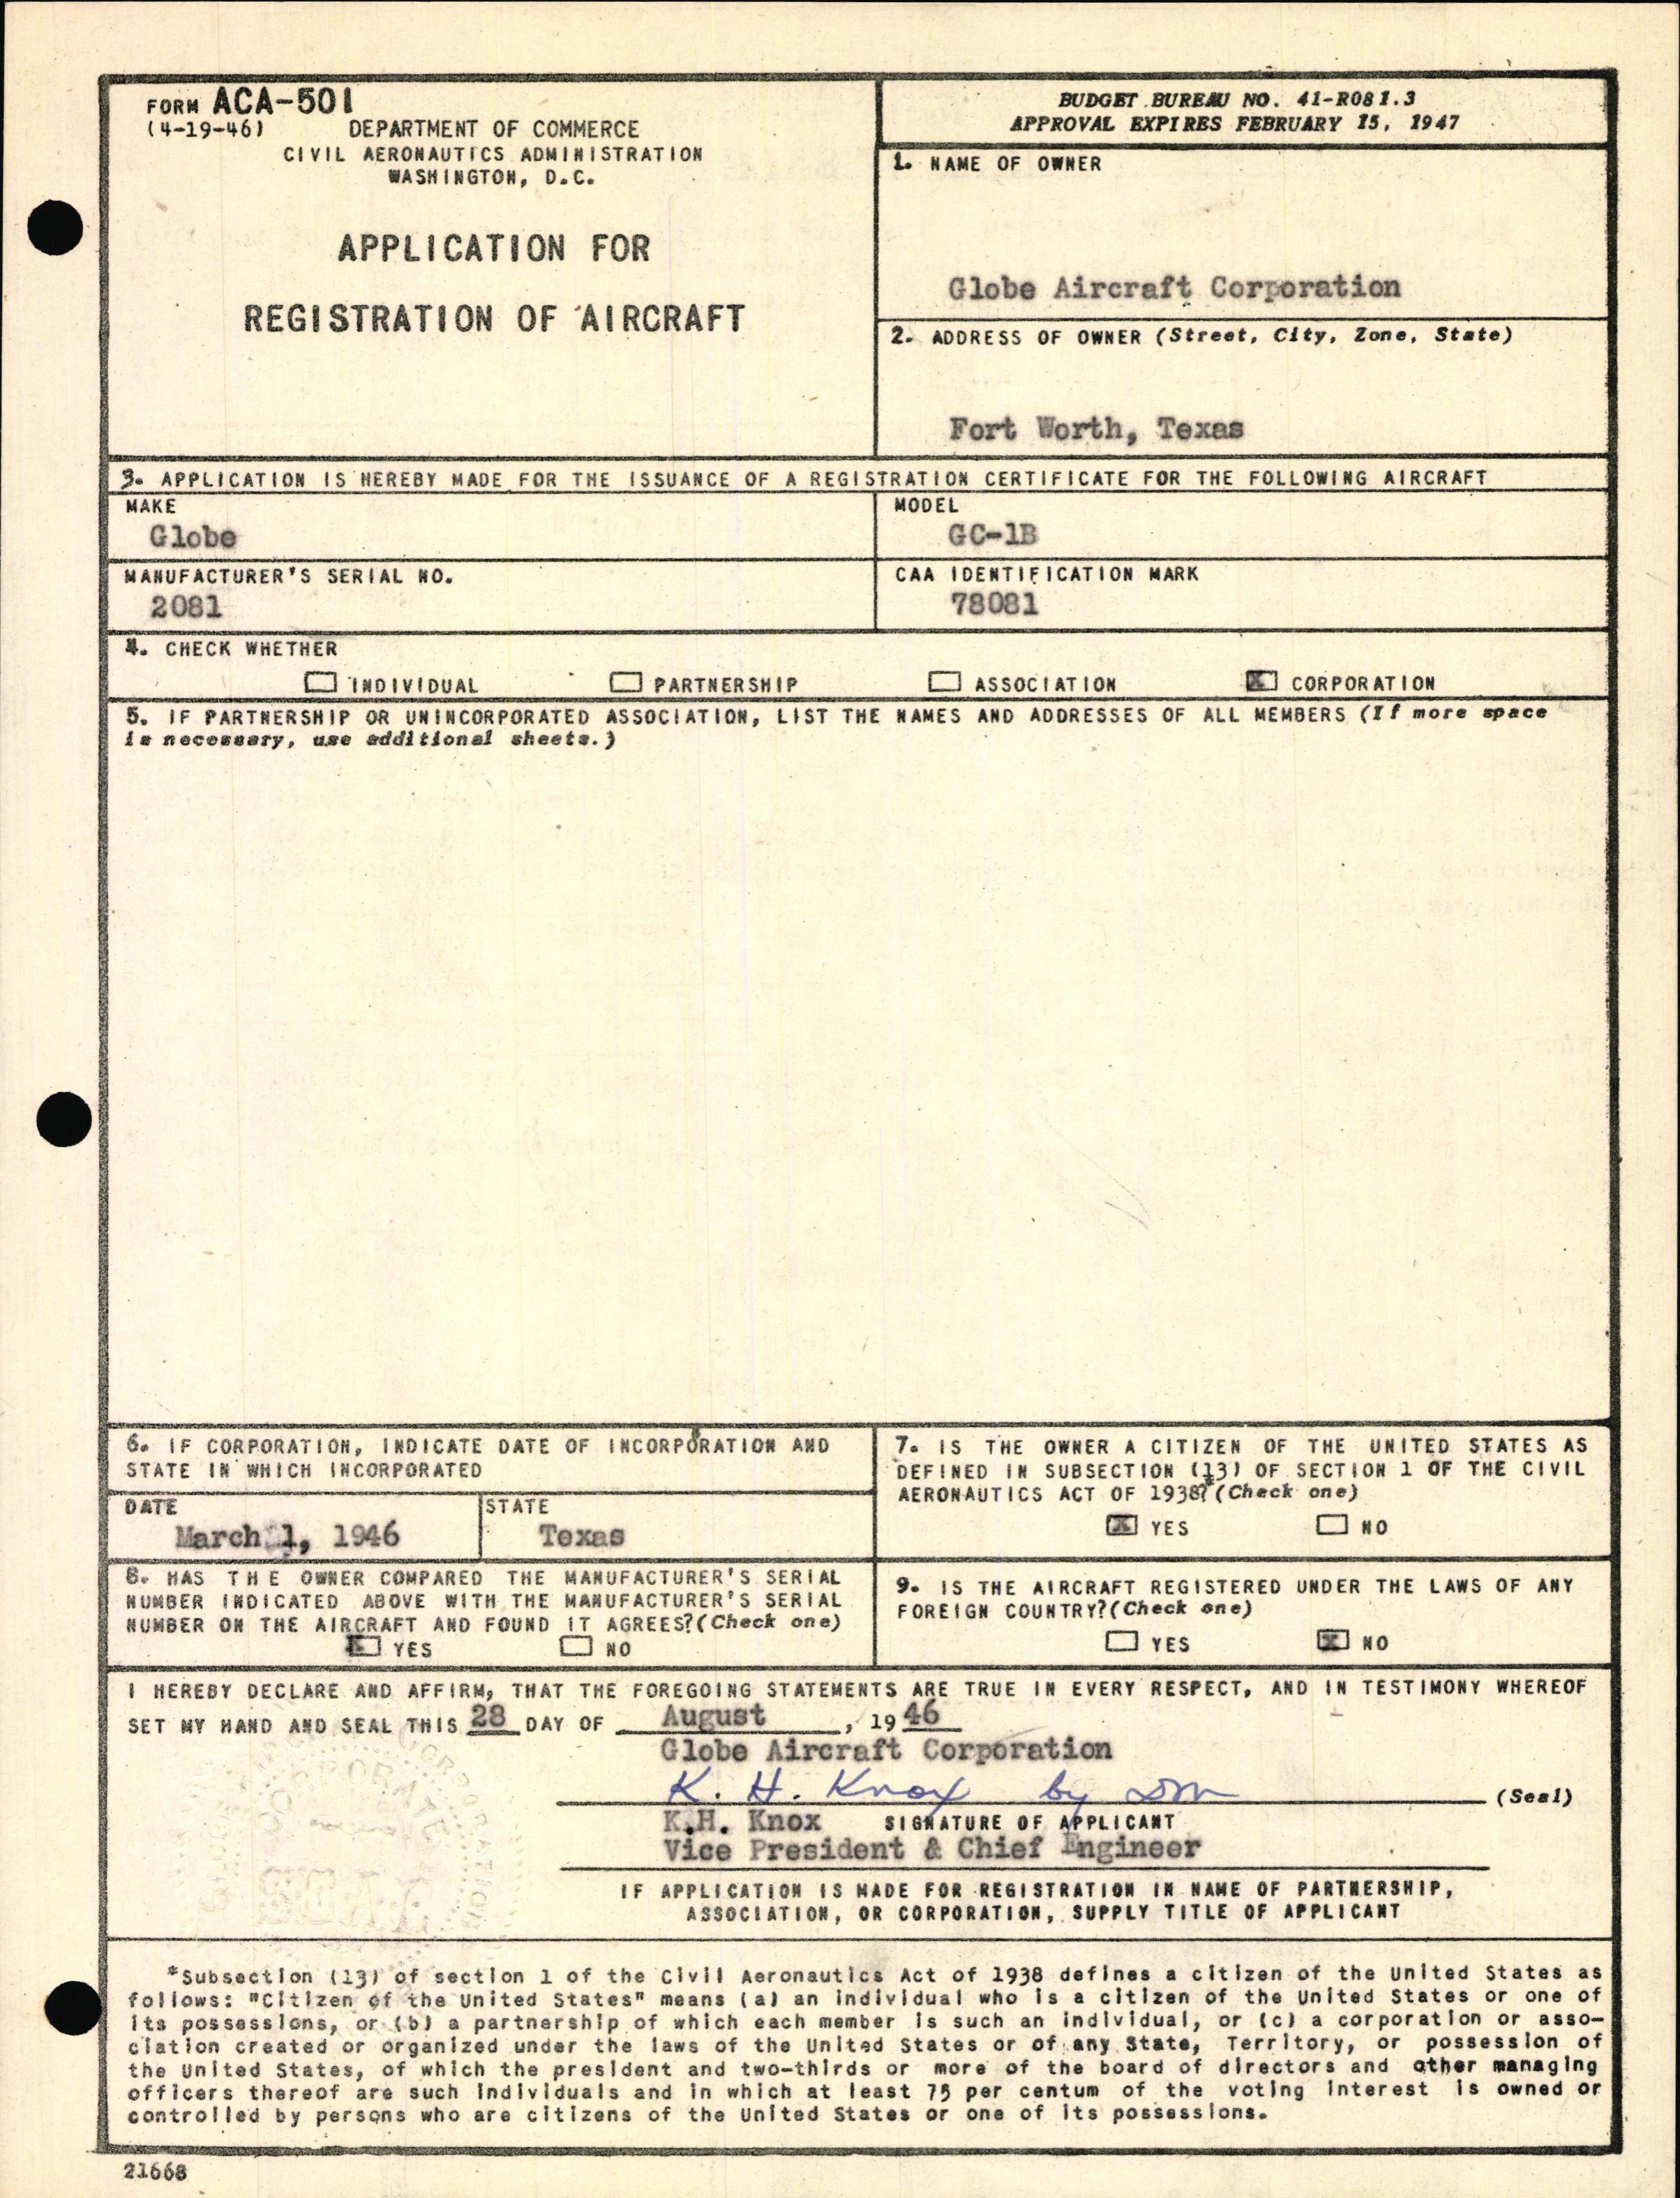 Sample page 1 from AirCorps Library document: Technical Information for Serial Number 2081